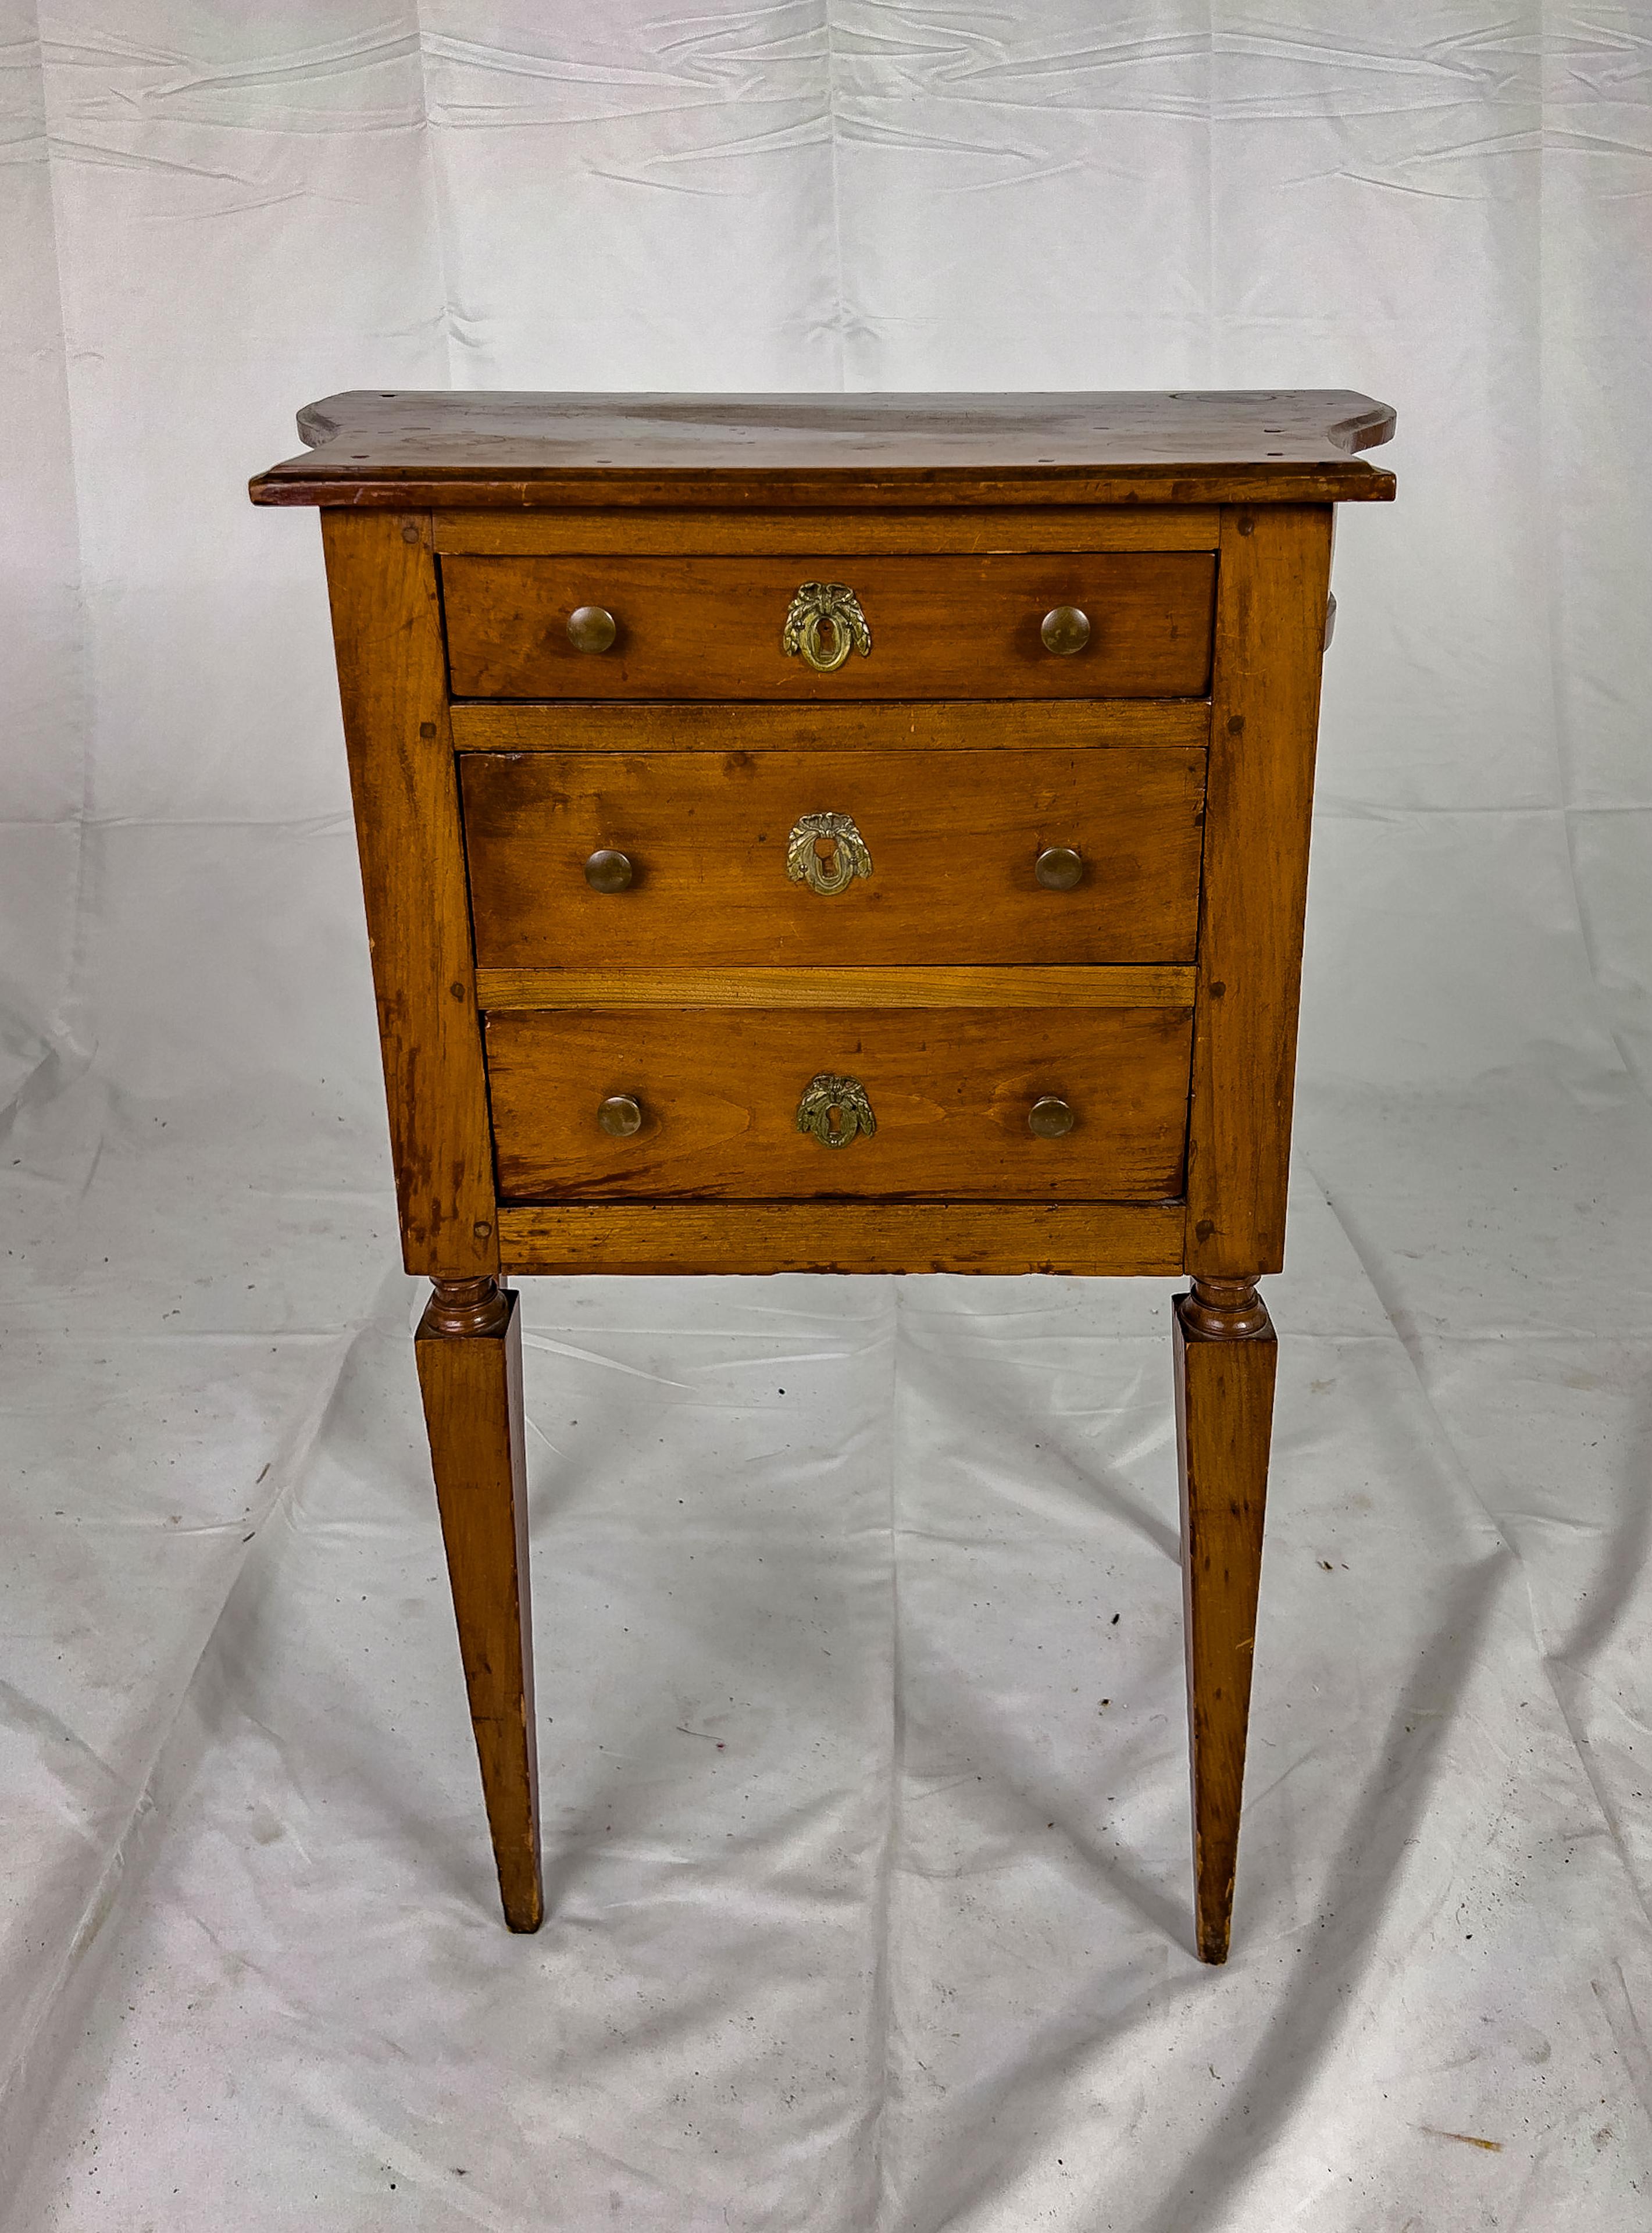 20th Century French Walnut Side Table with three drawers, shaped sides and straight tapered legs. This piece has a very mellow and rich patina.